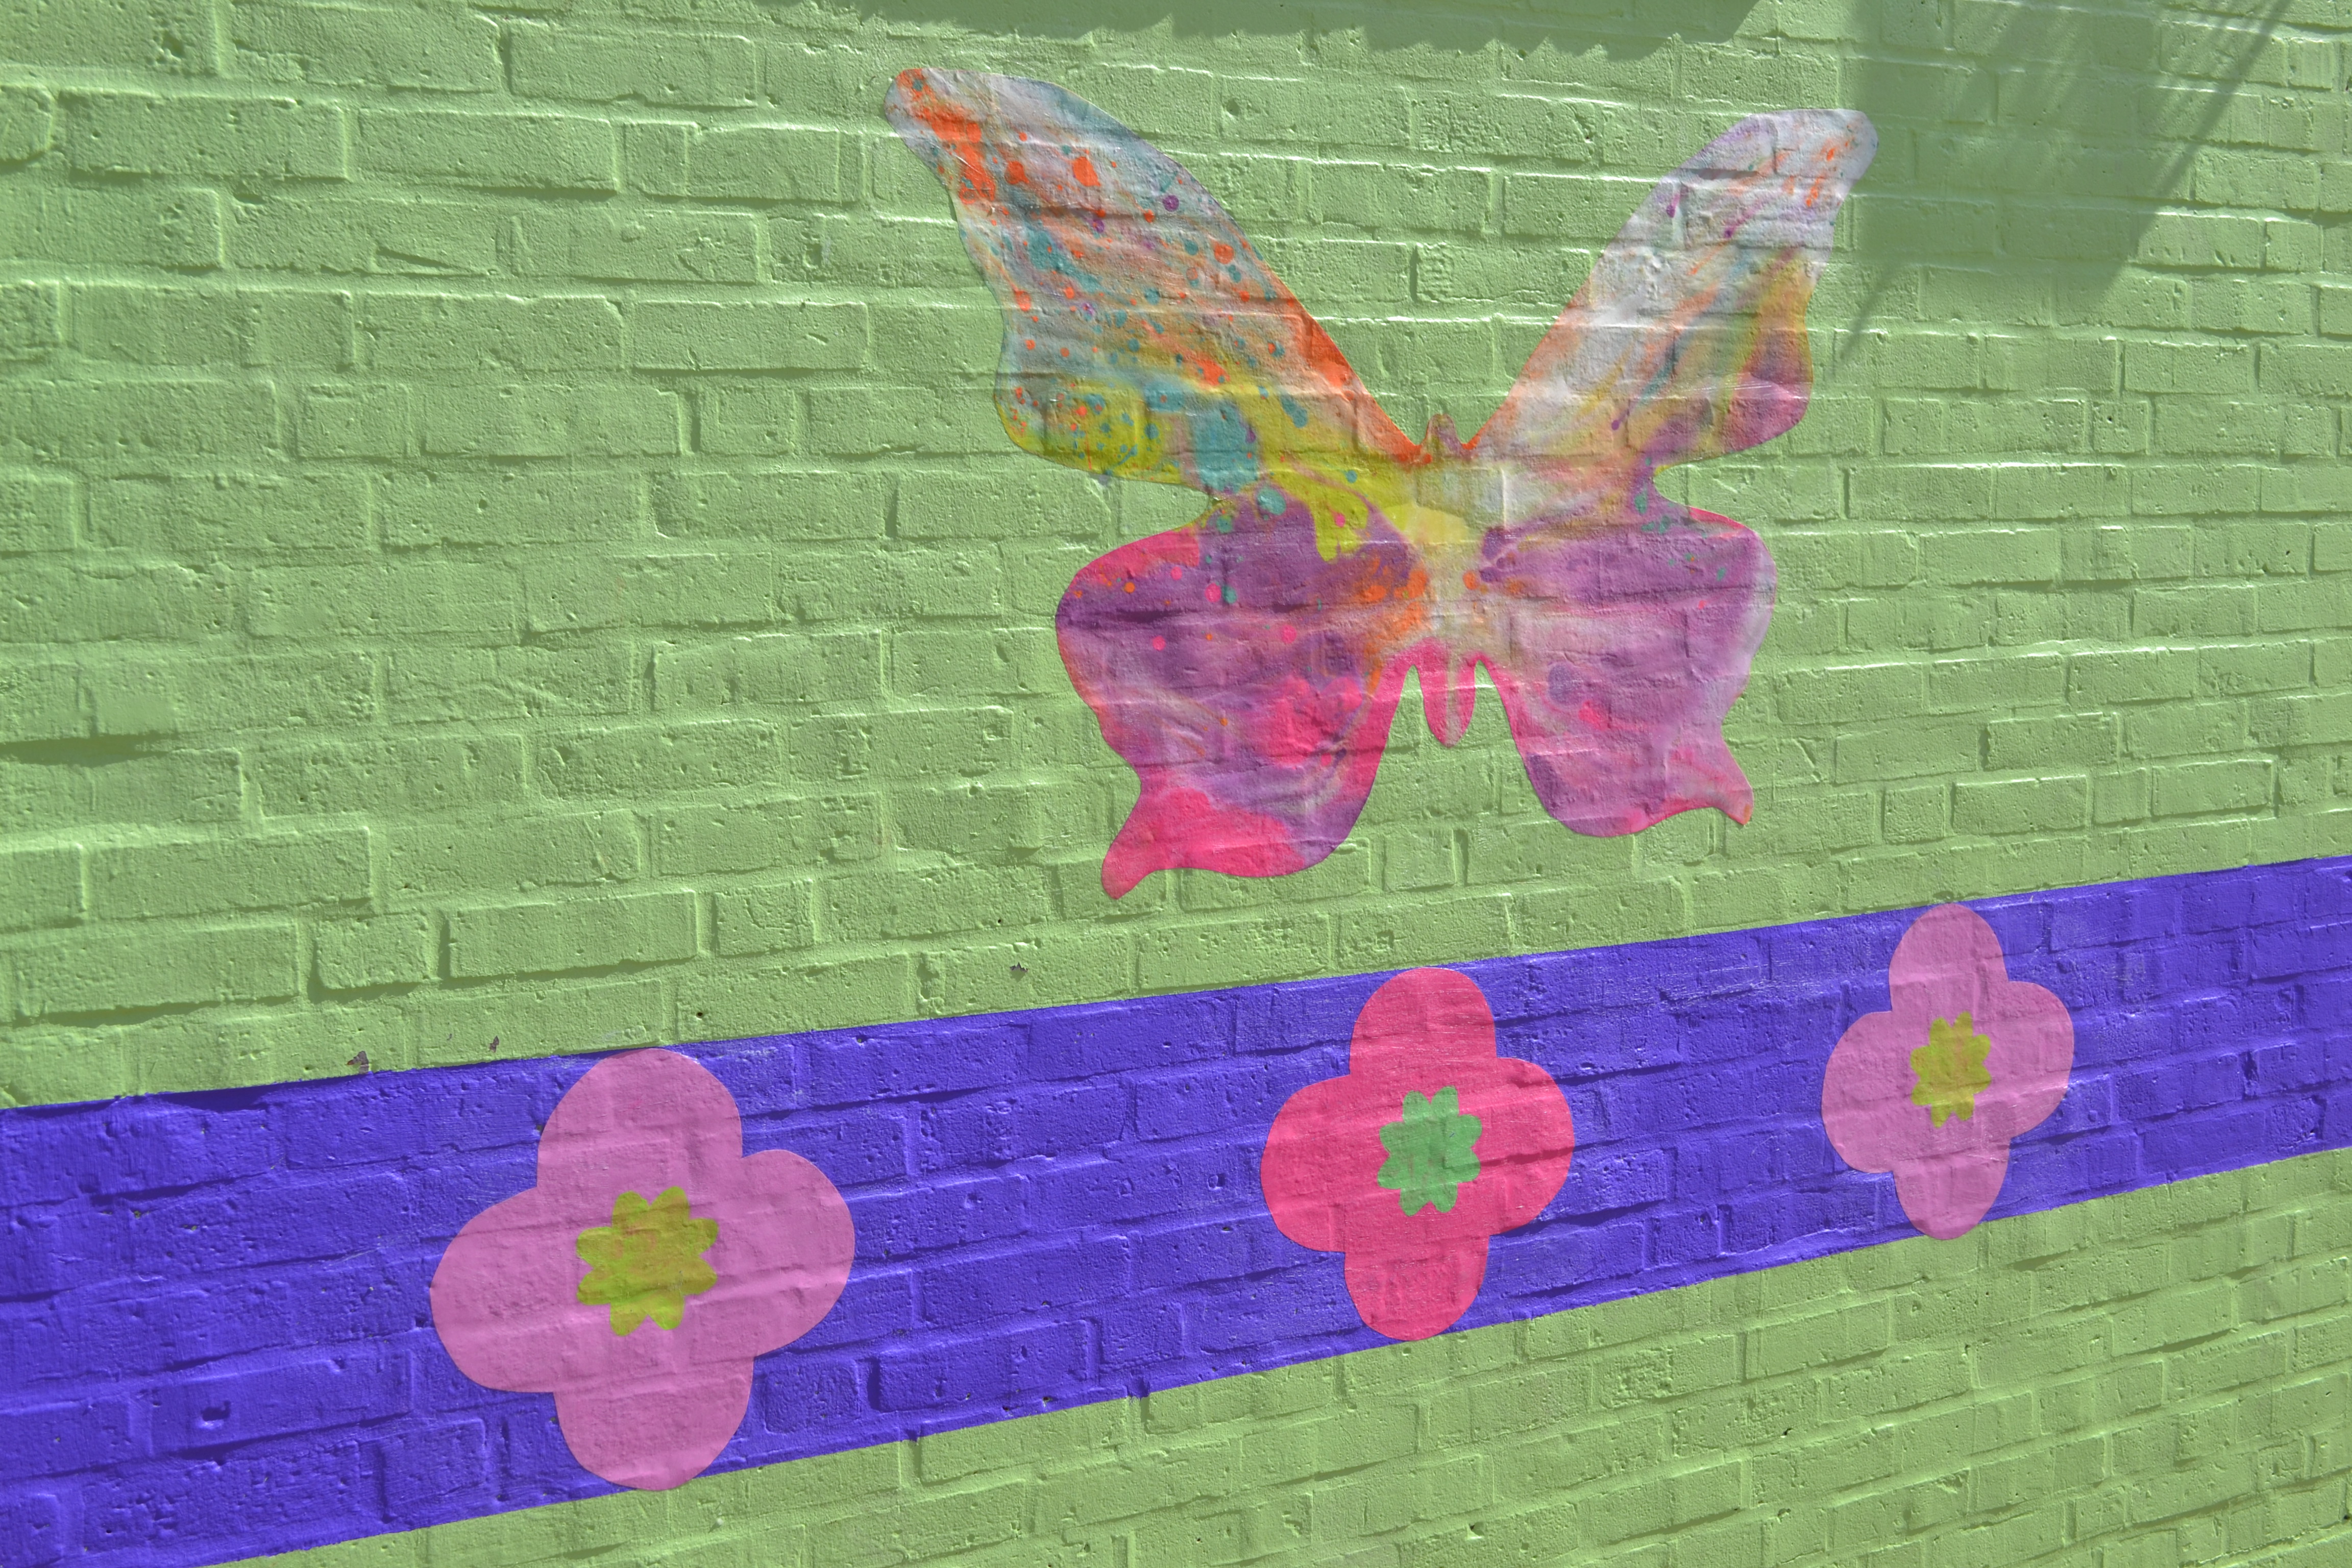 Pre-K students and some summer camp attendees helped paint butterflies on the mural